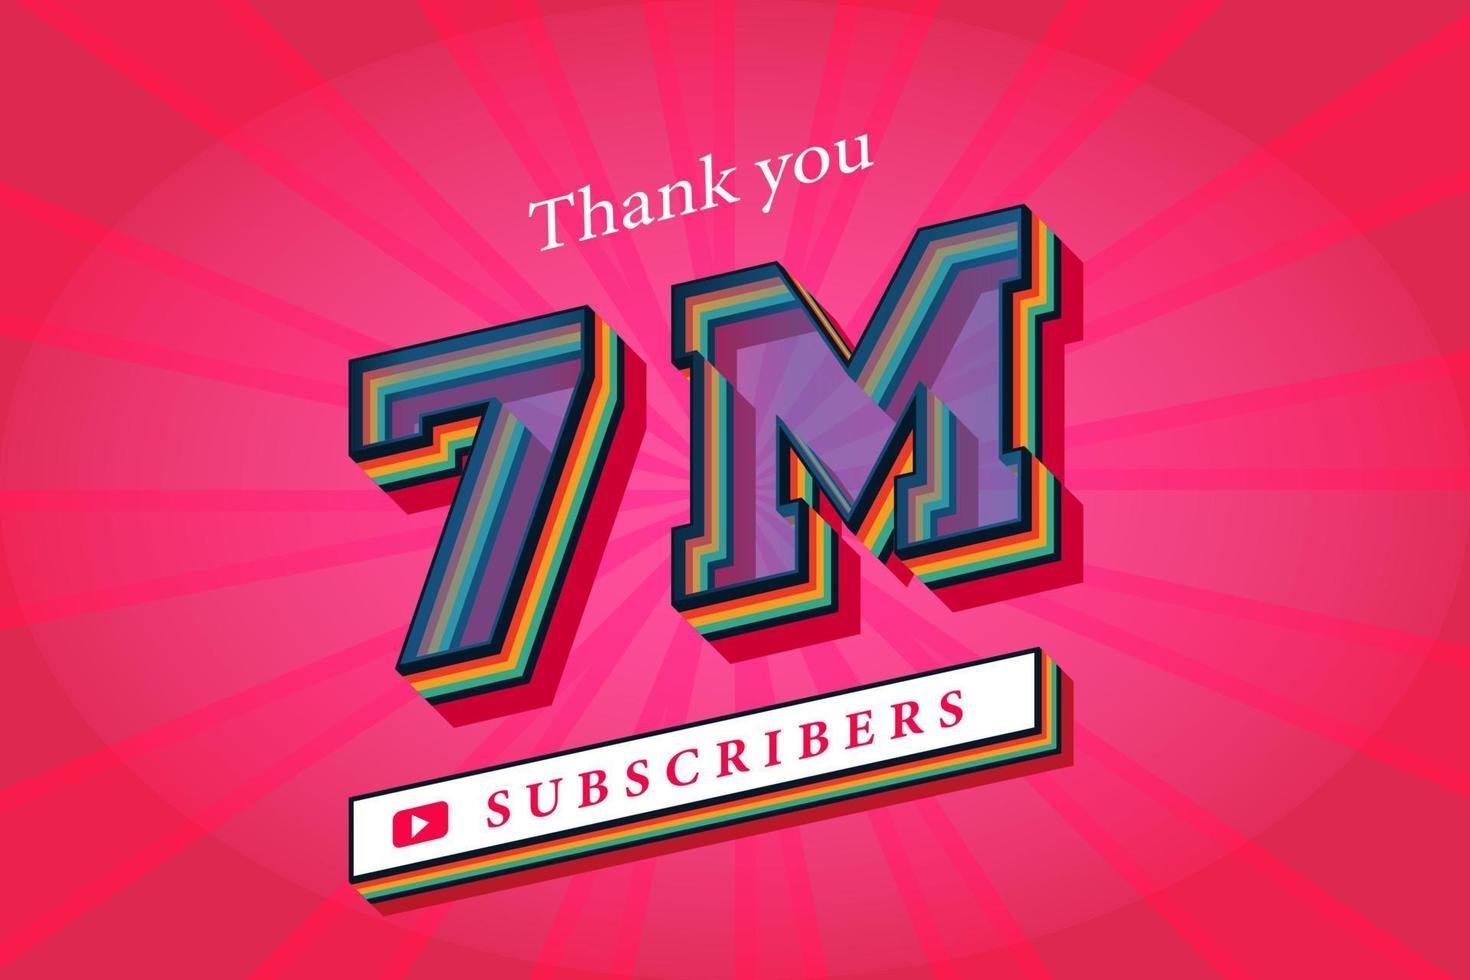 7m subscribers celebration thank you social media banner. 7 million subscribers 3d rendering vector